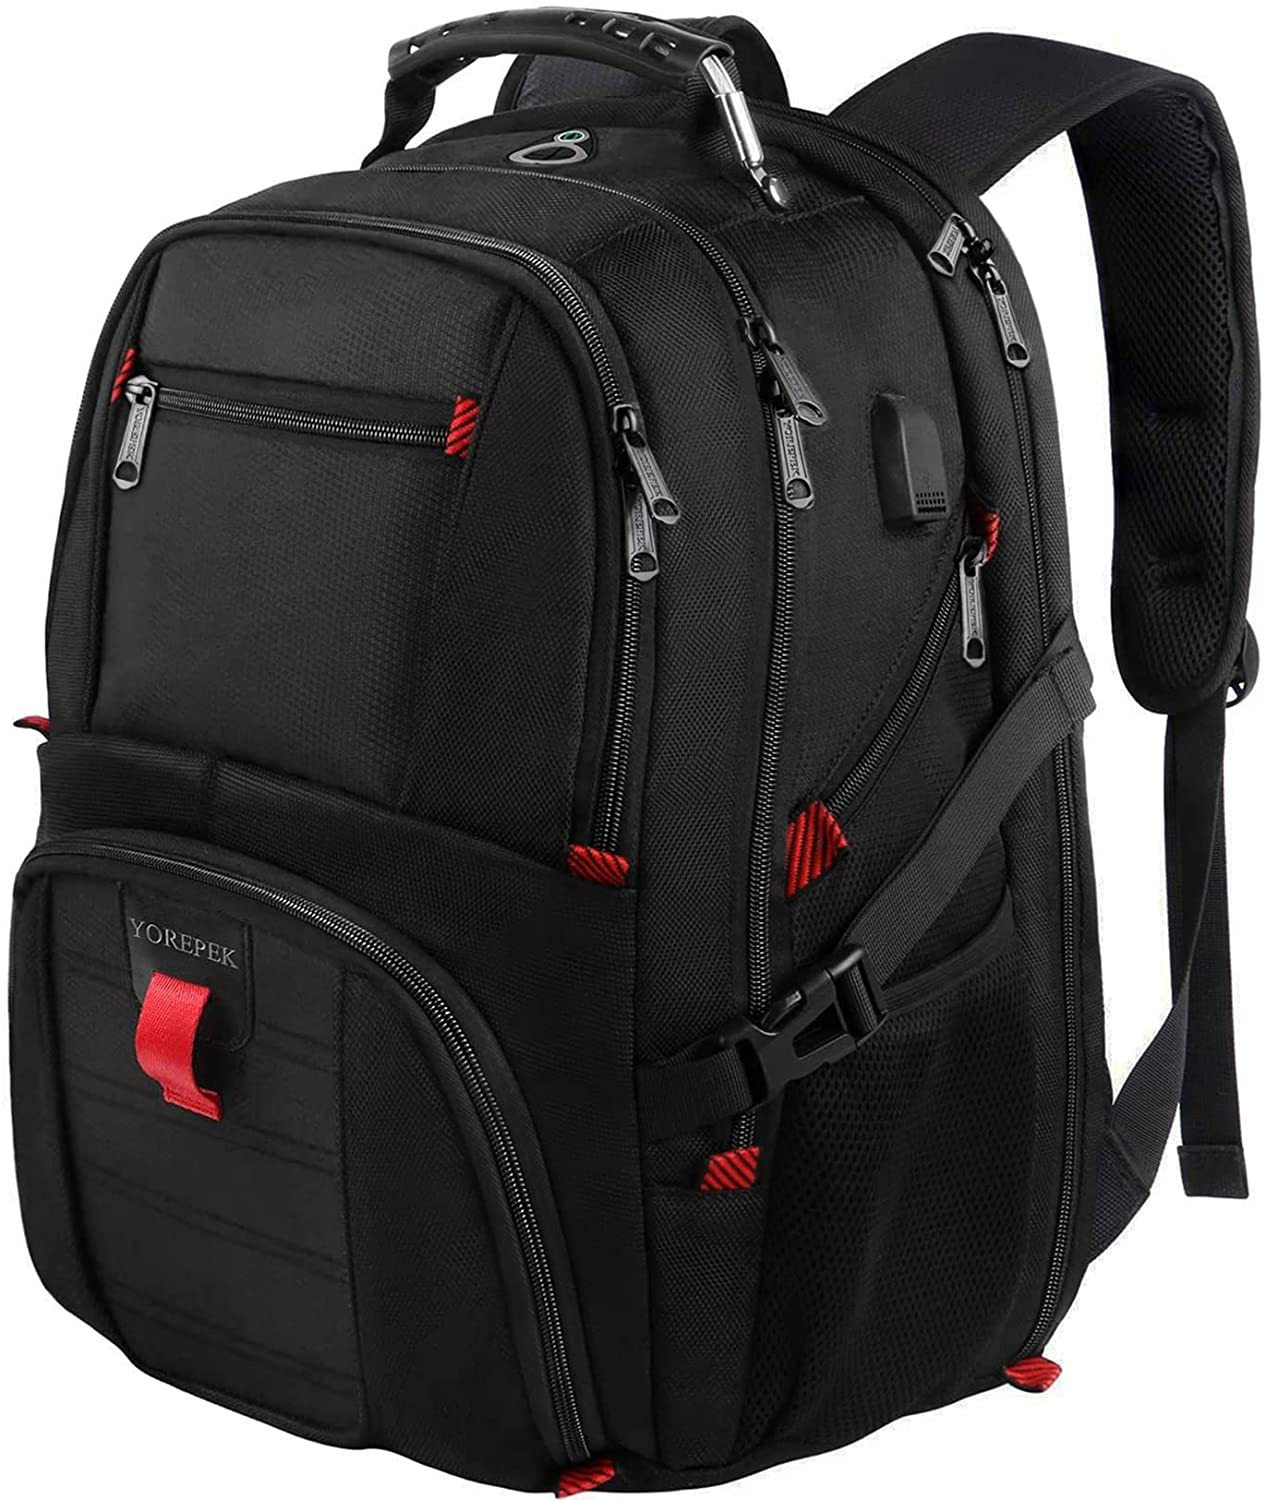 Yorepek Extra Large Backpack, Fits 17In Laptops, with USB Charging Port, Black